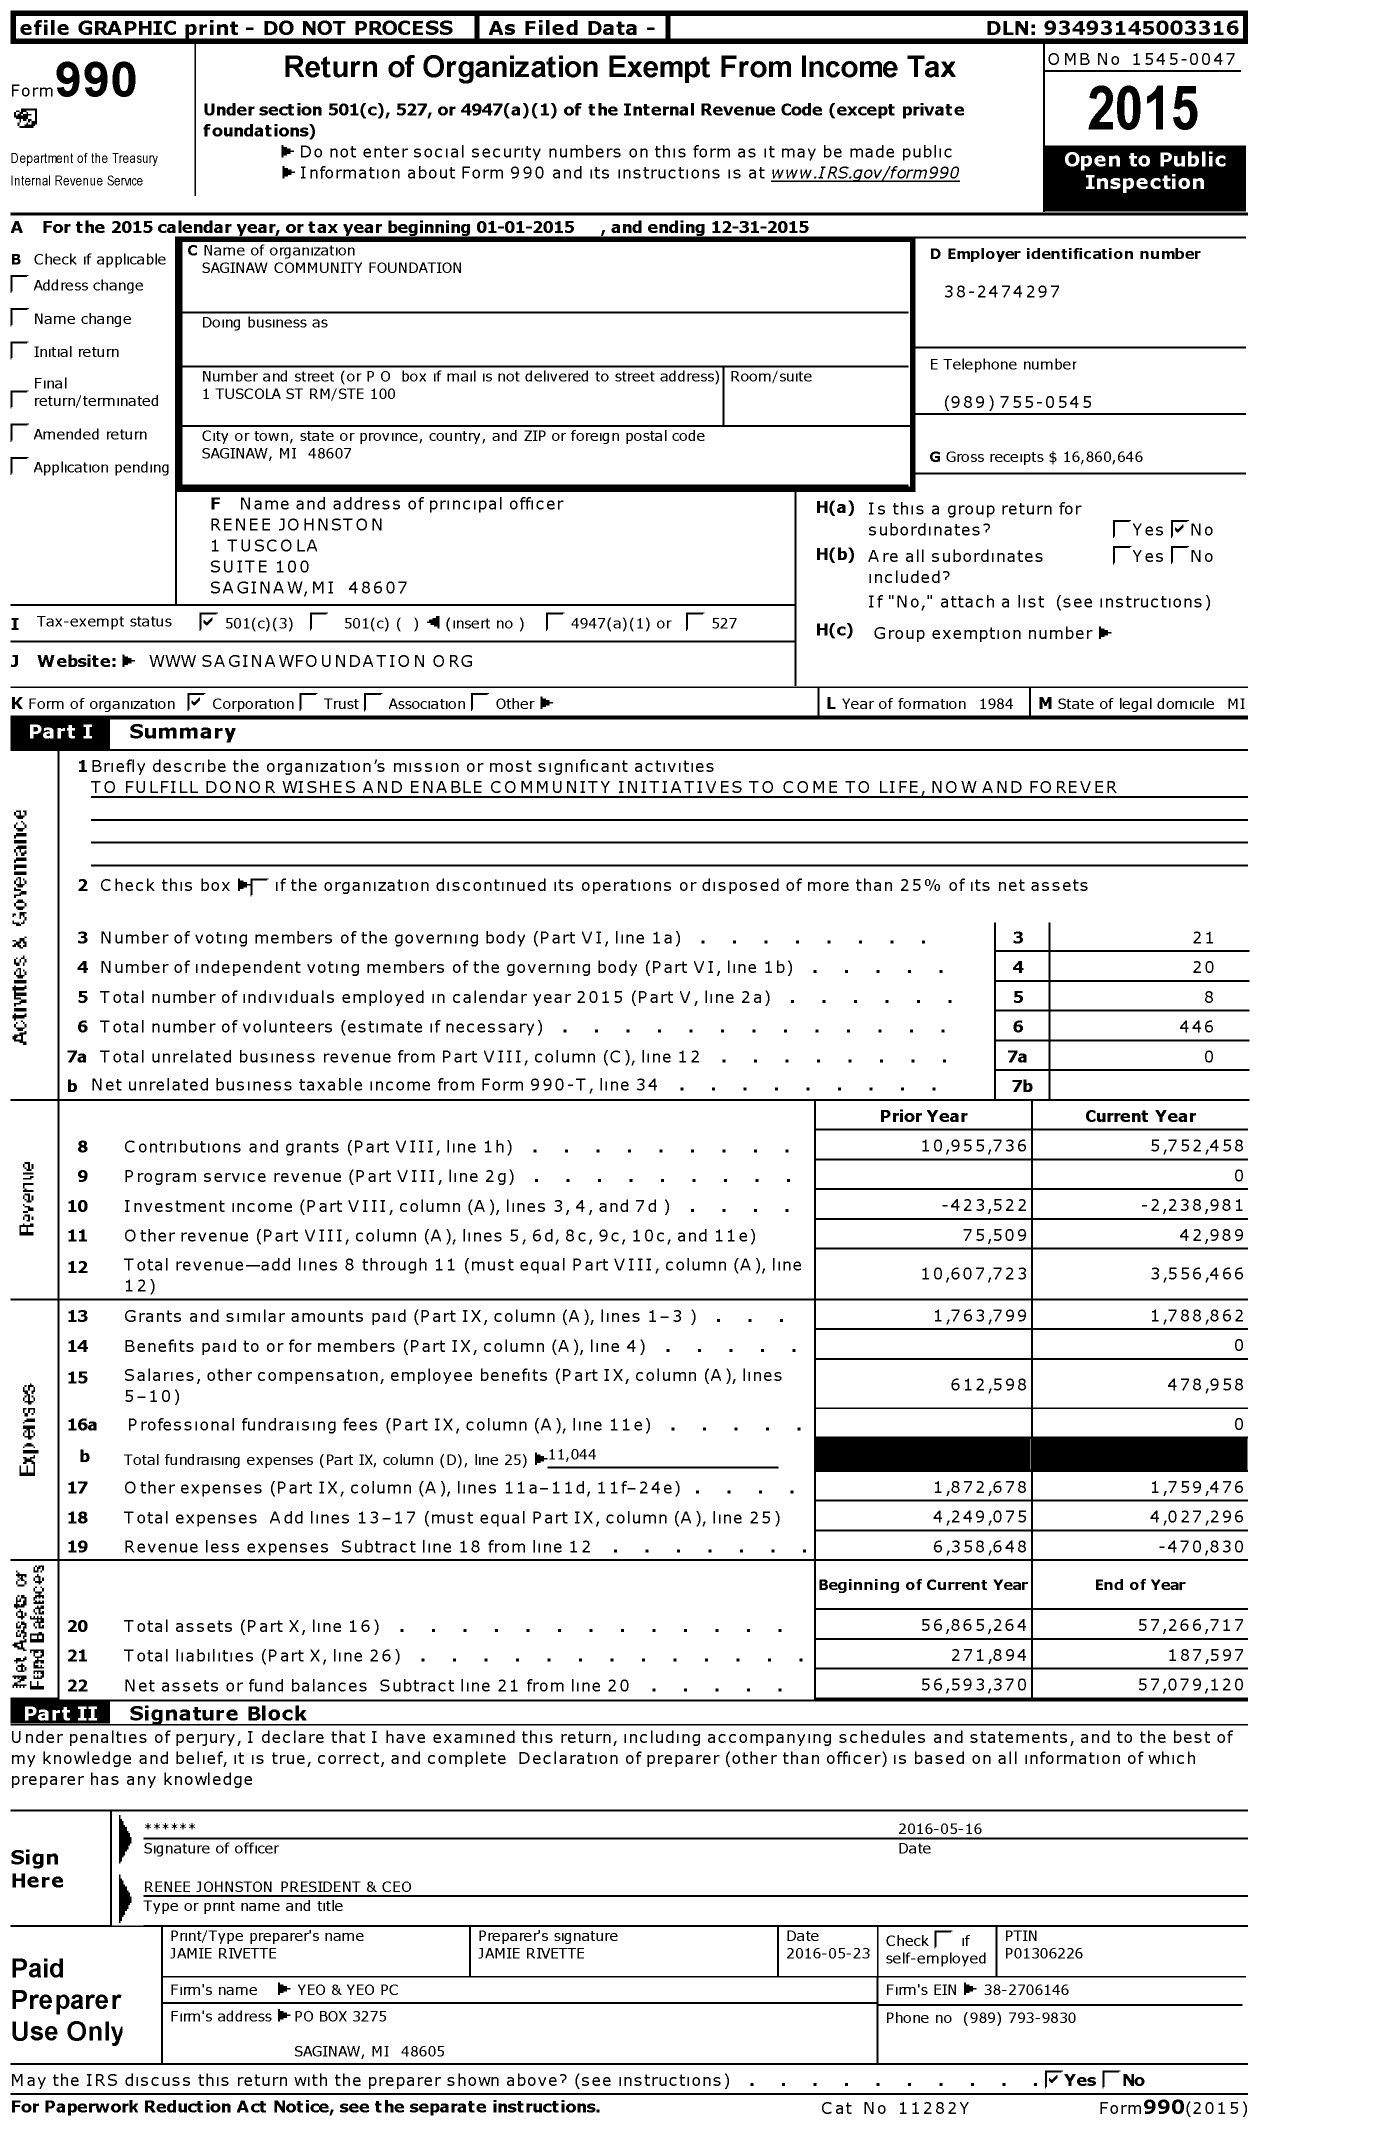 Image of first page of 2015 Form 990 for Saginaw Community Foundation (SCF)